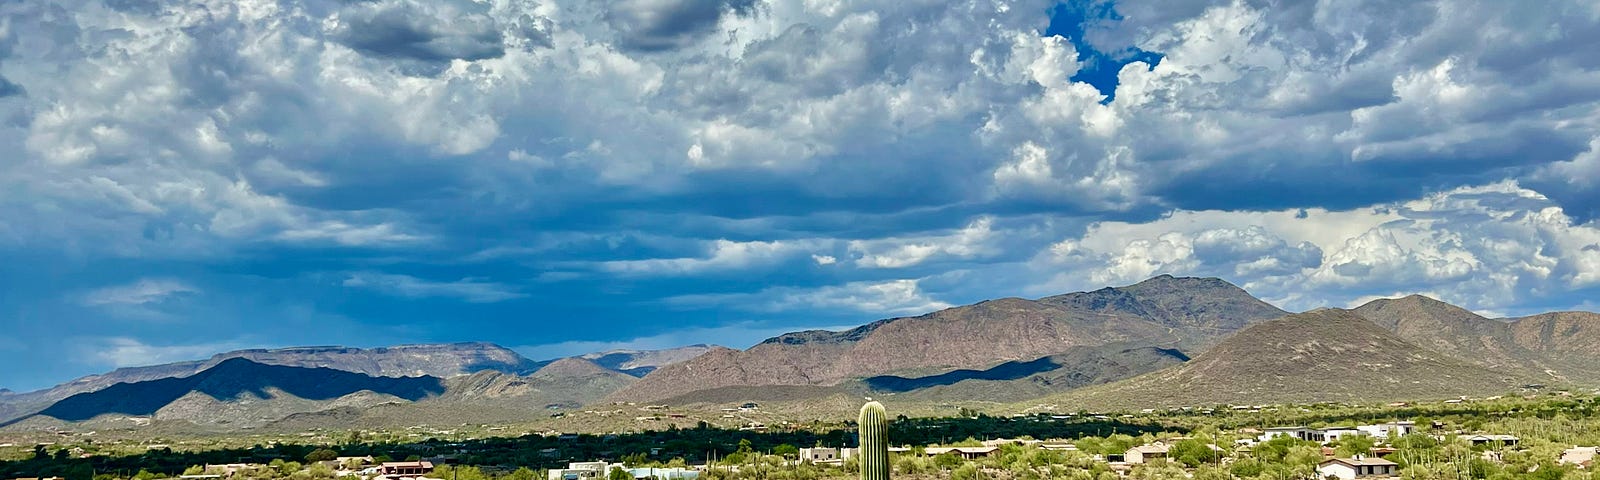 A photograph of the desert landscape filled with green shrubbery and a single cactus.